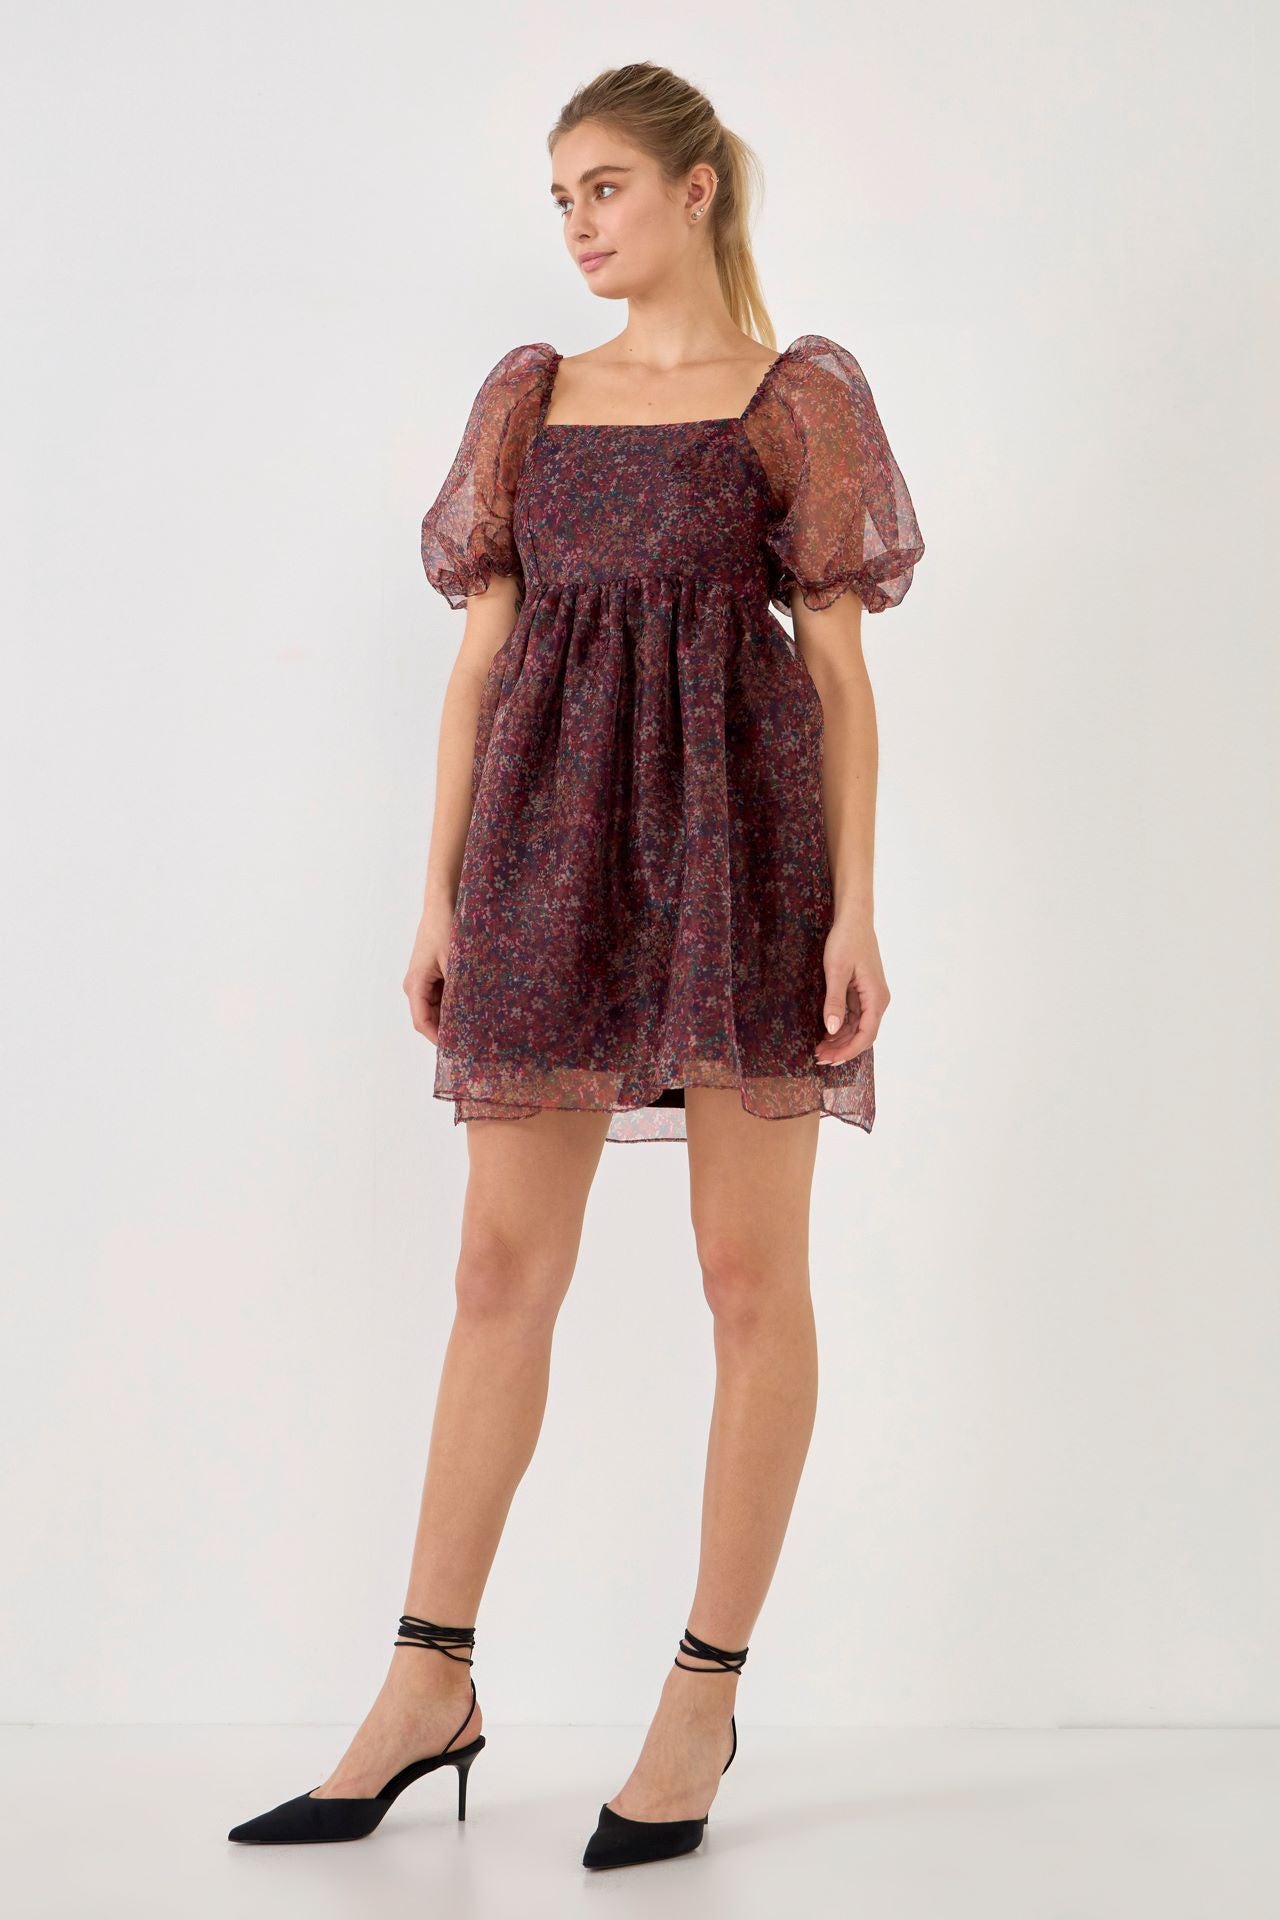 Orchard Blooms Dress